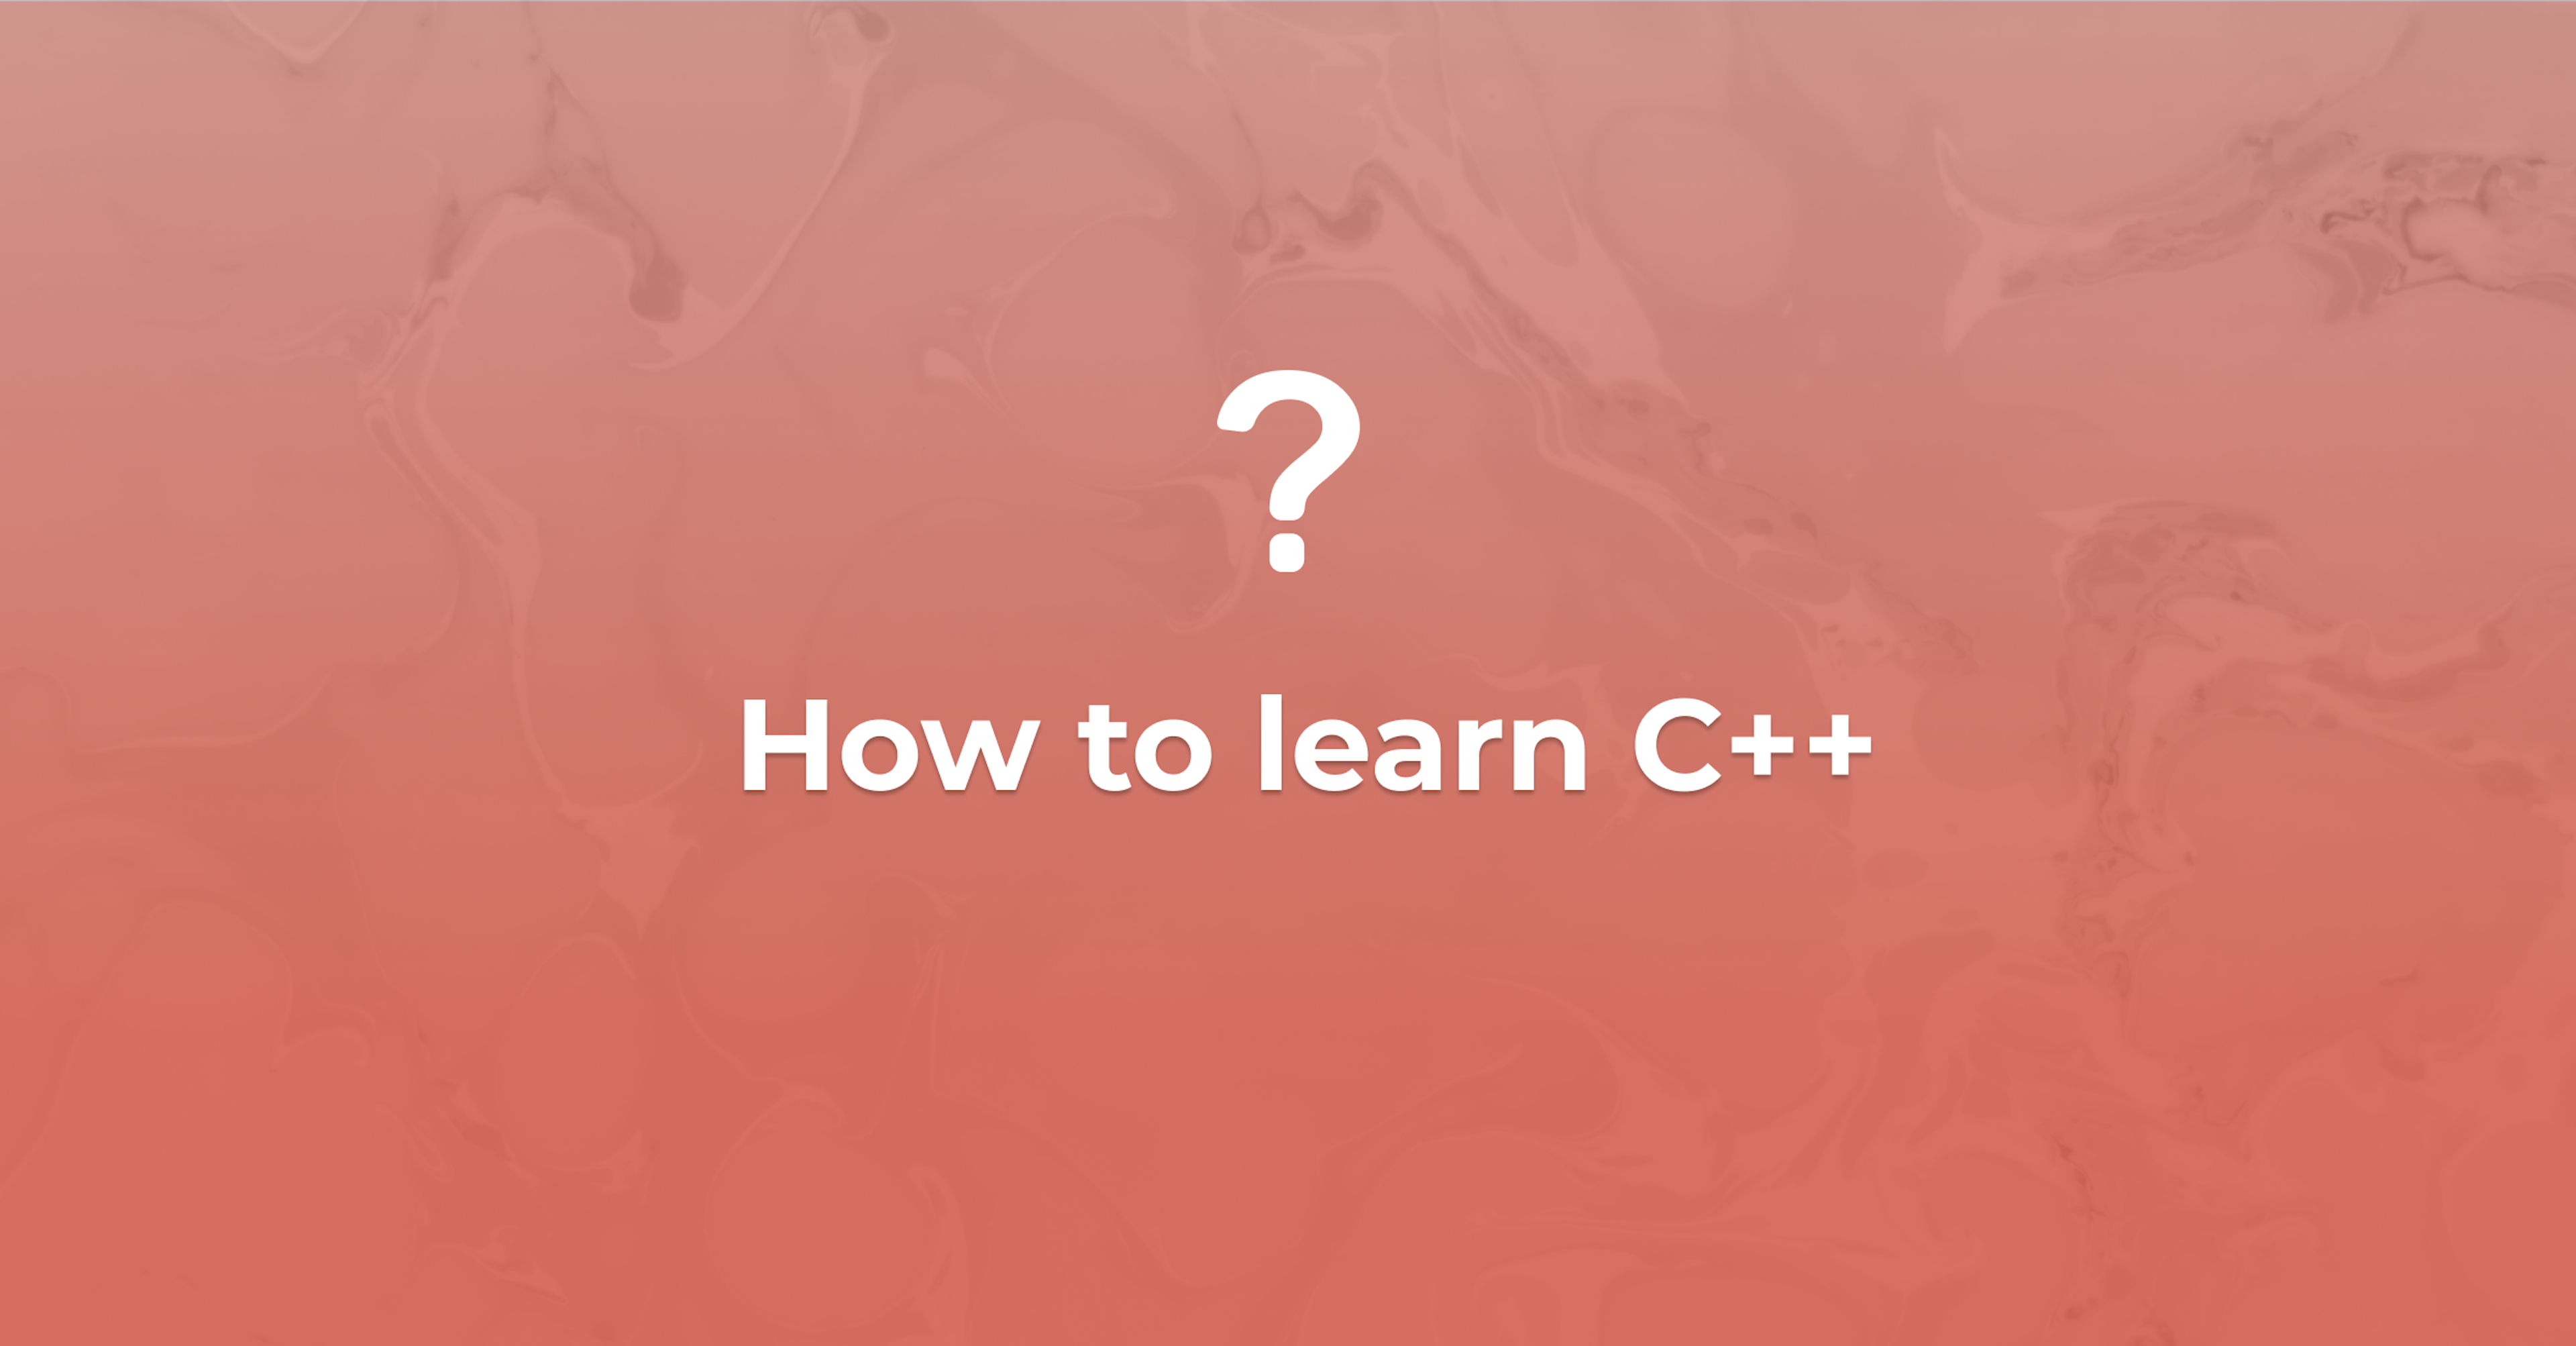 How to learn C++